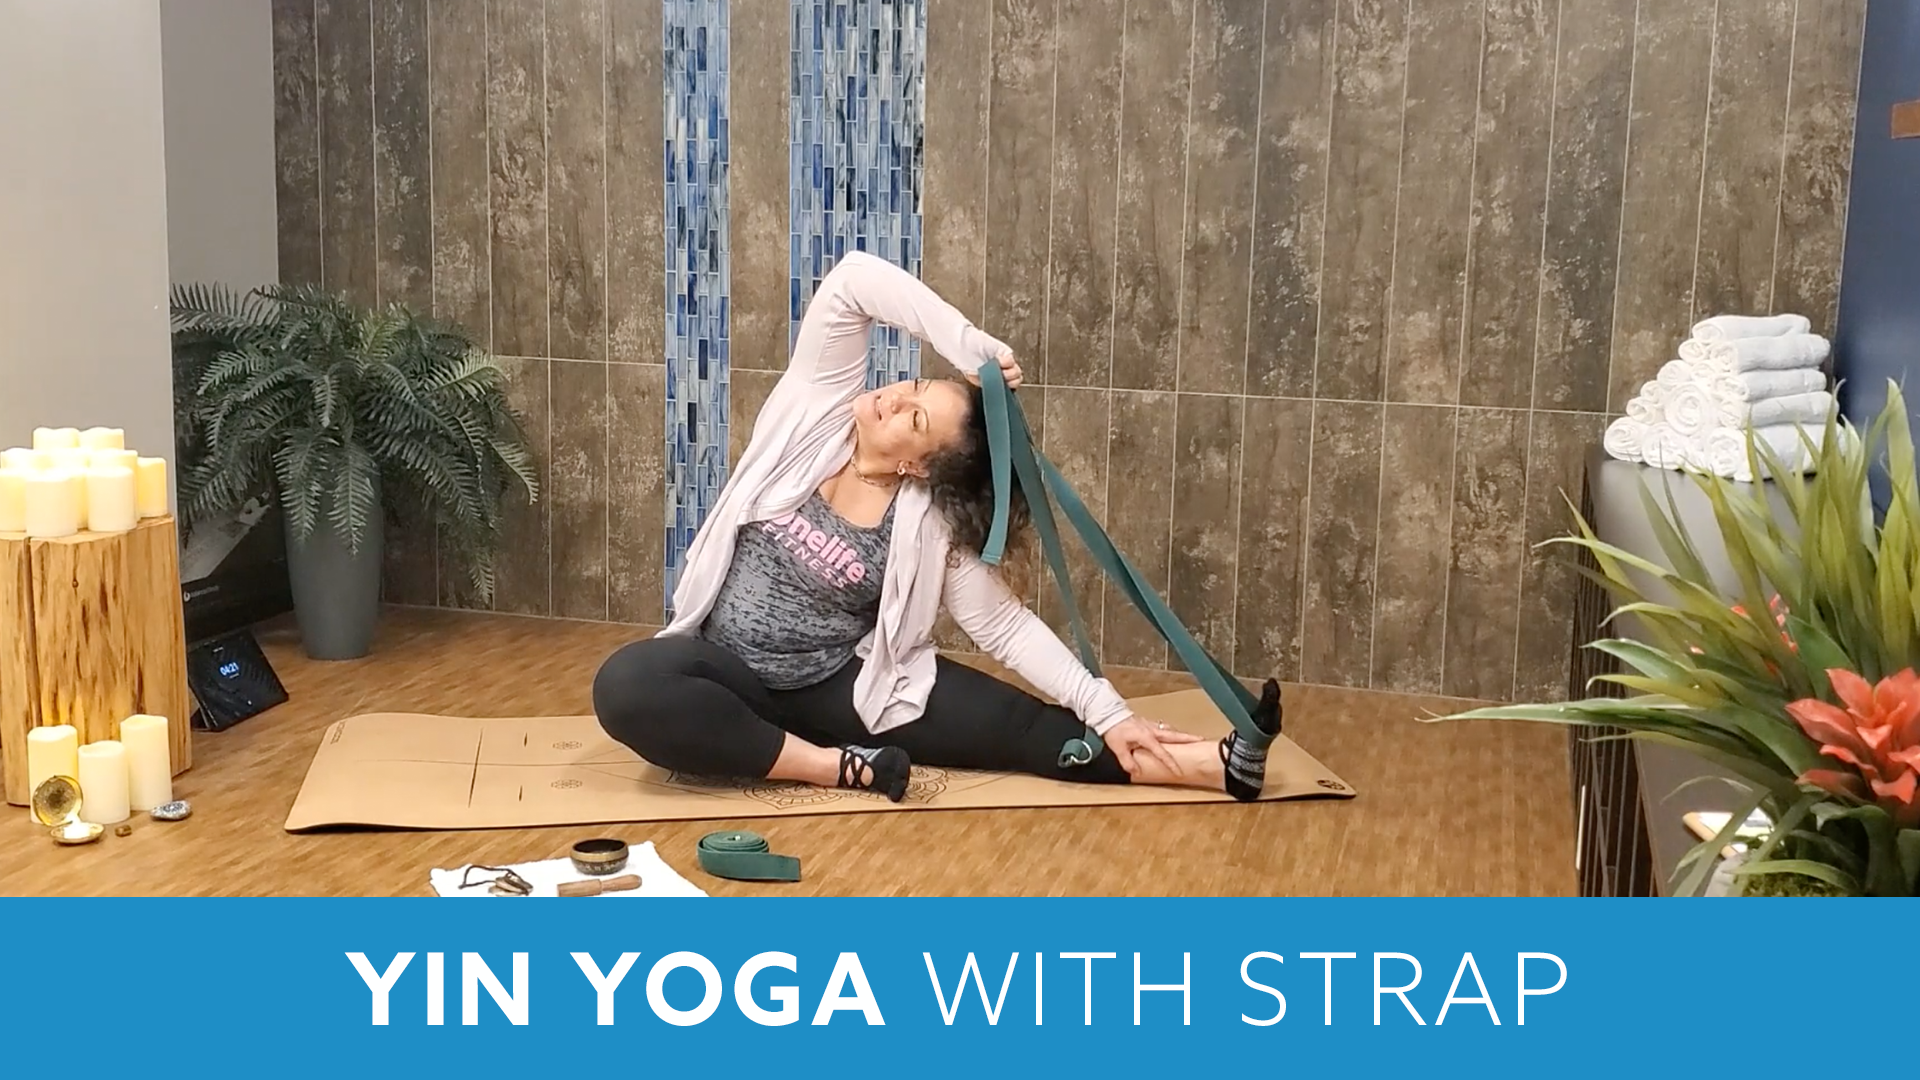 The Yoga Strap ~ The Best Yoga Prop